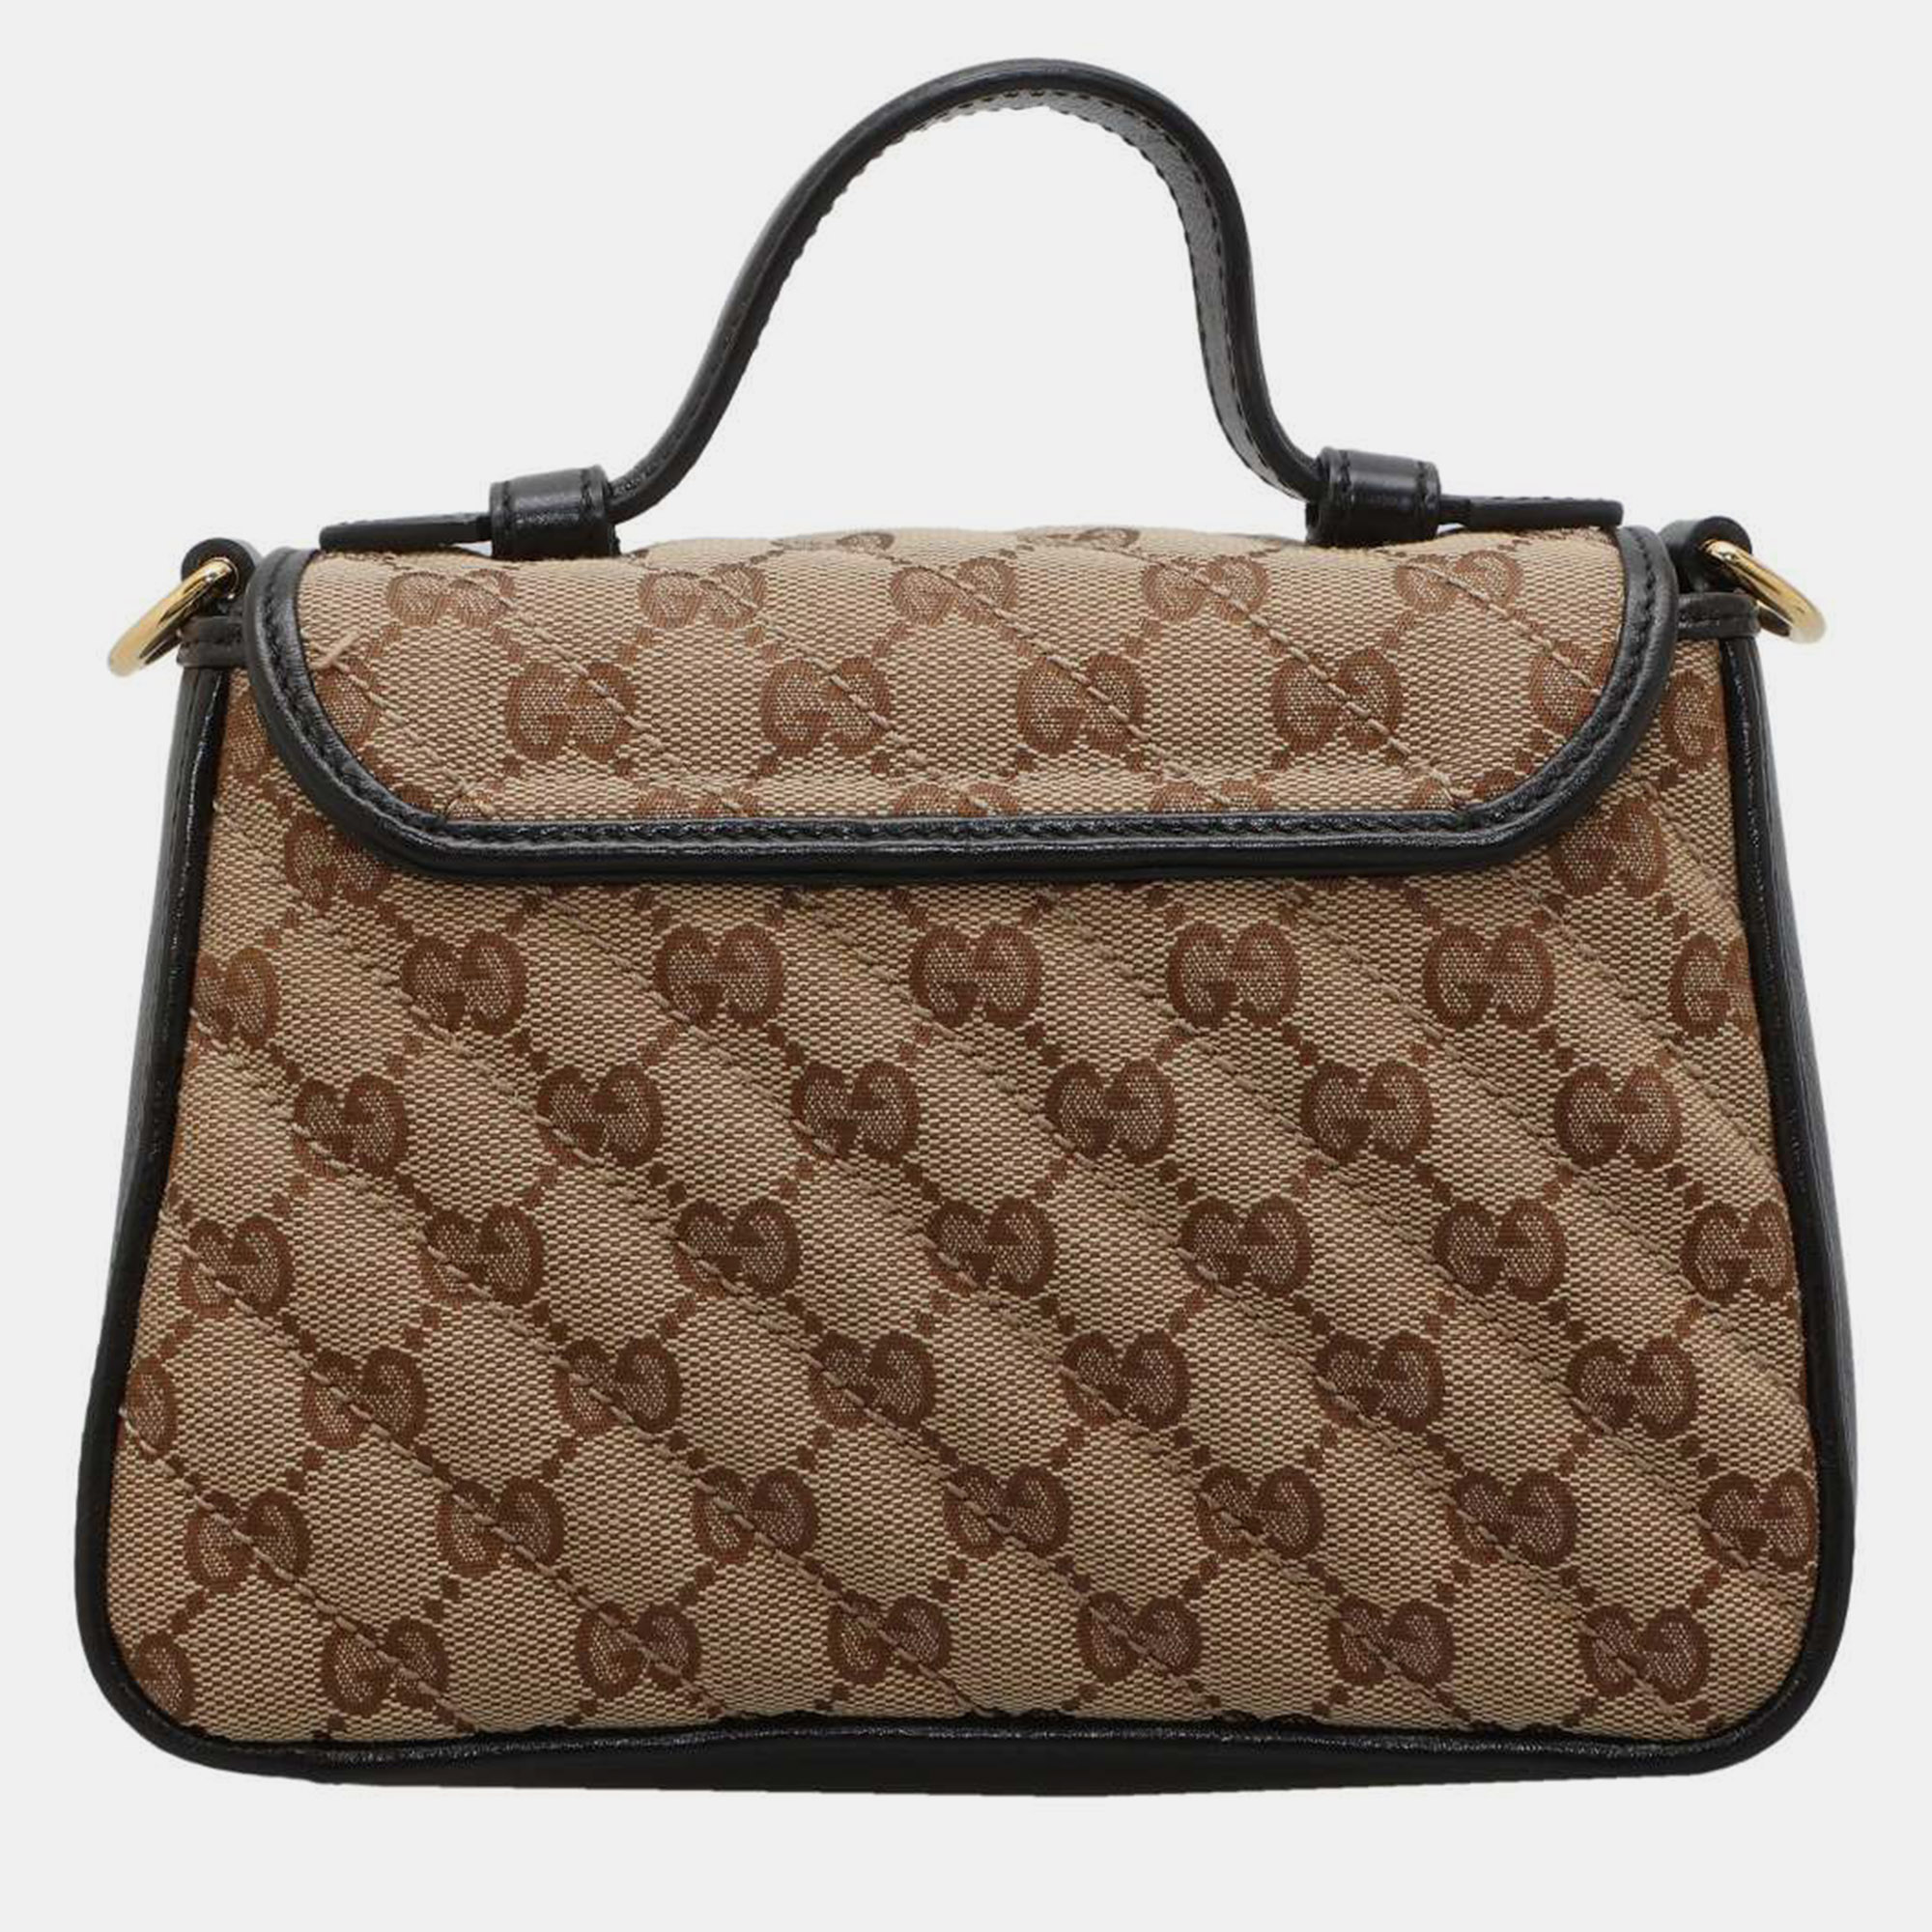 Gucci Beige GG Canvas And Leather GG Marmont Top Handle Bag